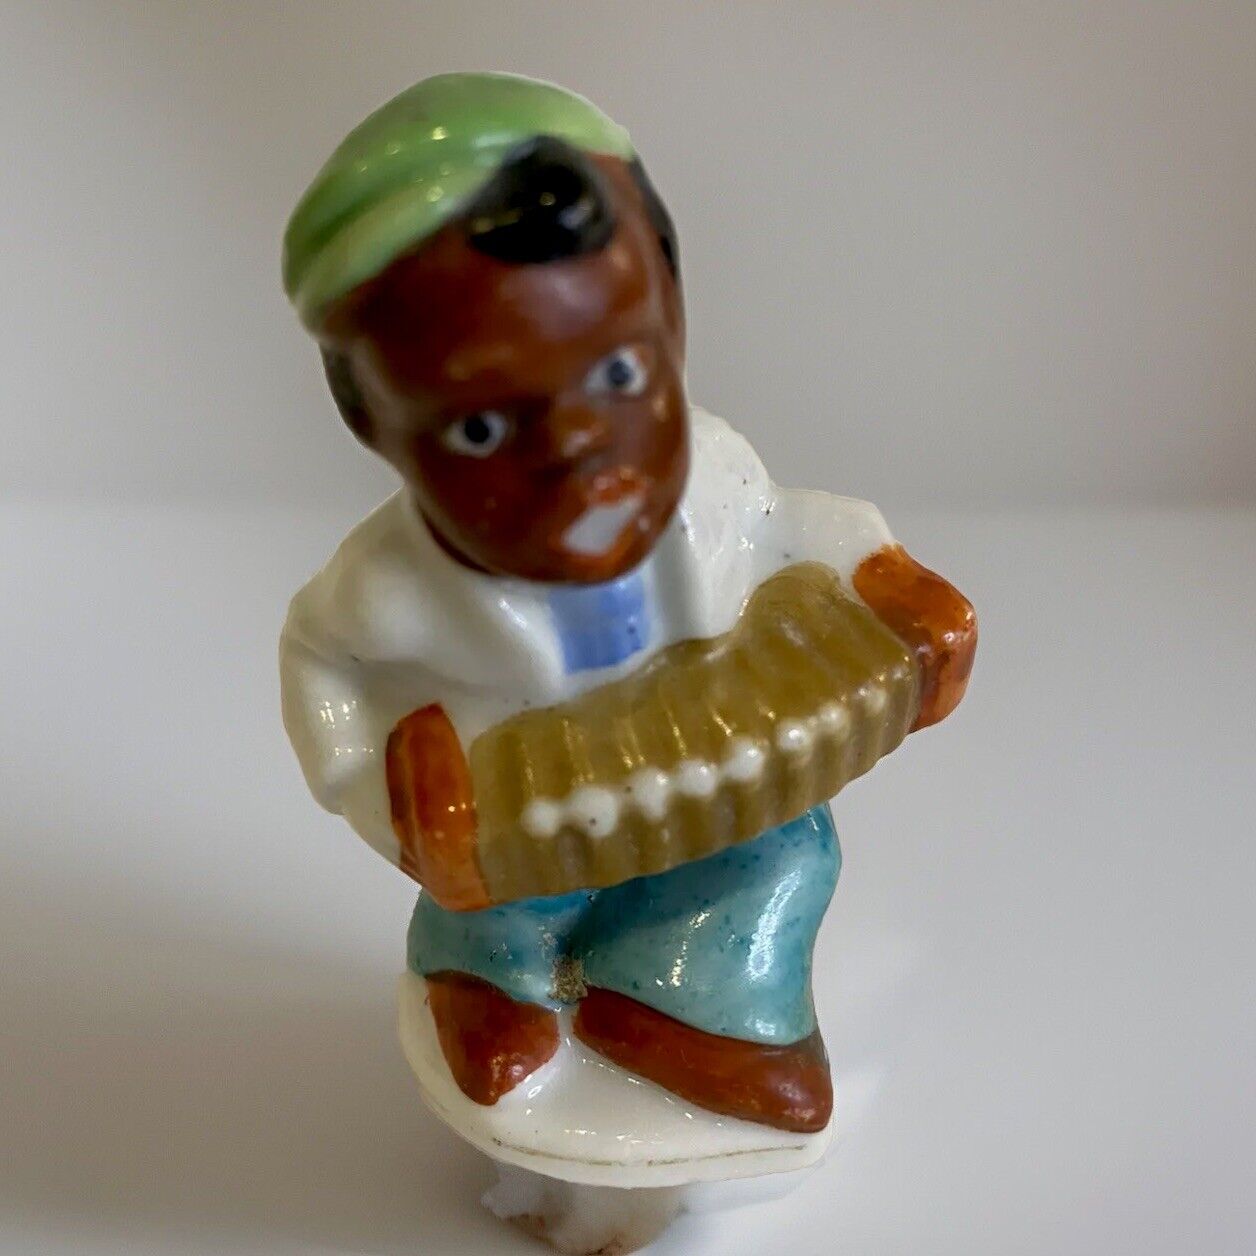 Black Americana Vintage Figurine Playing An Accordion Made In Occupied Japan